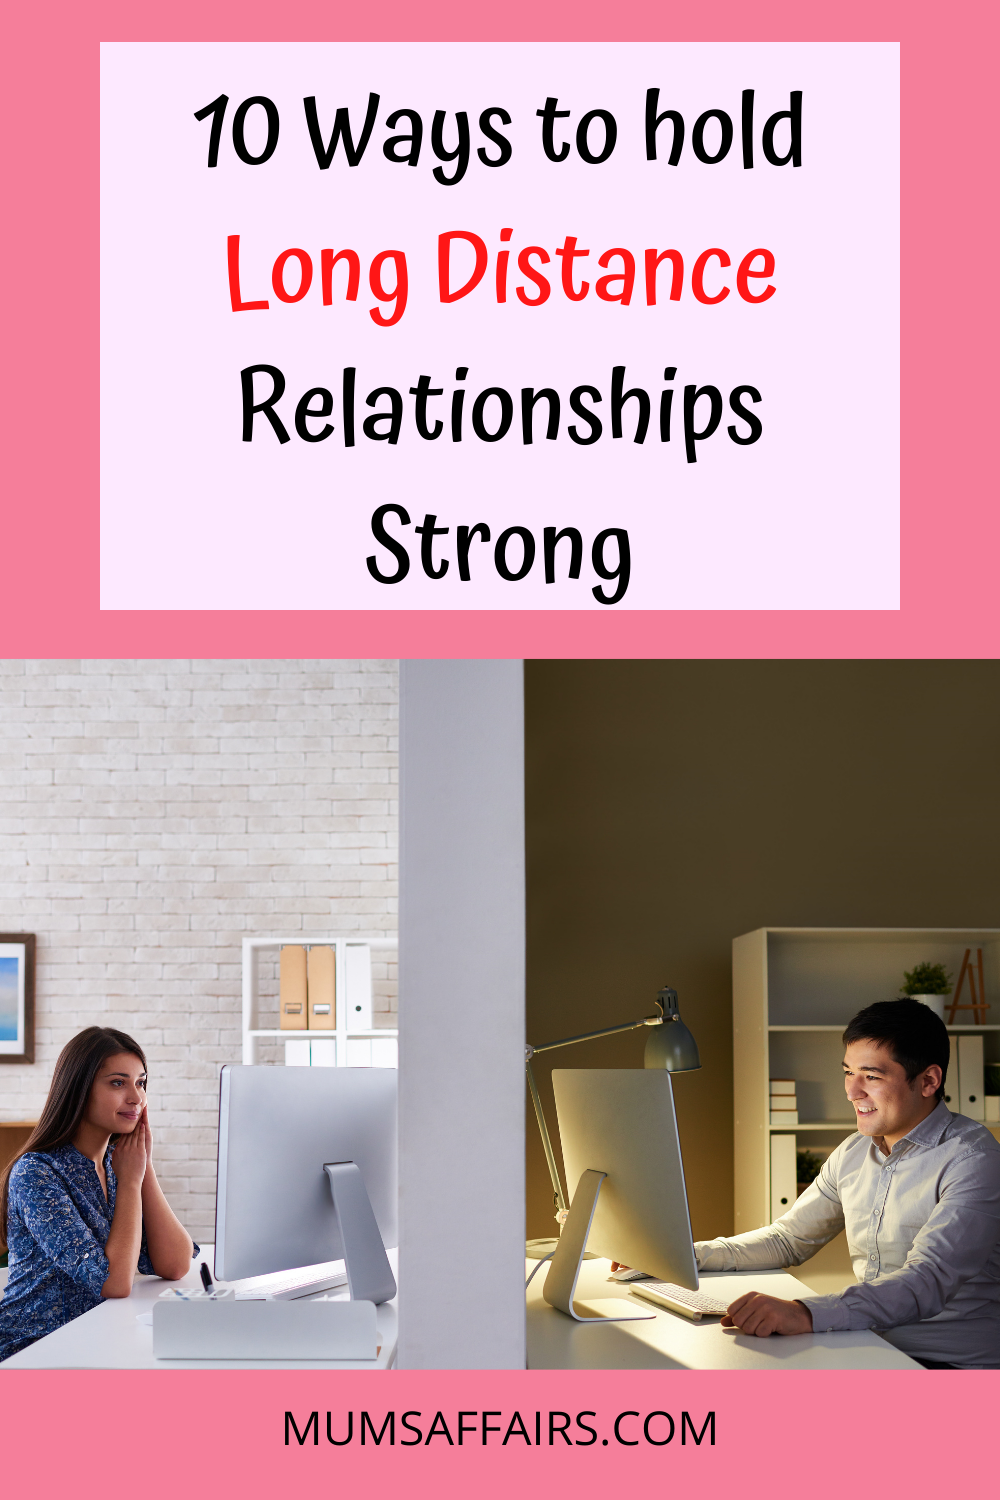 Long Distance Relationships Strong with partner